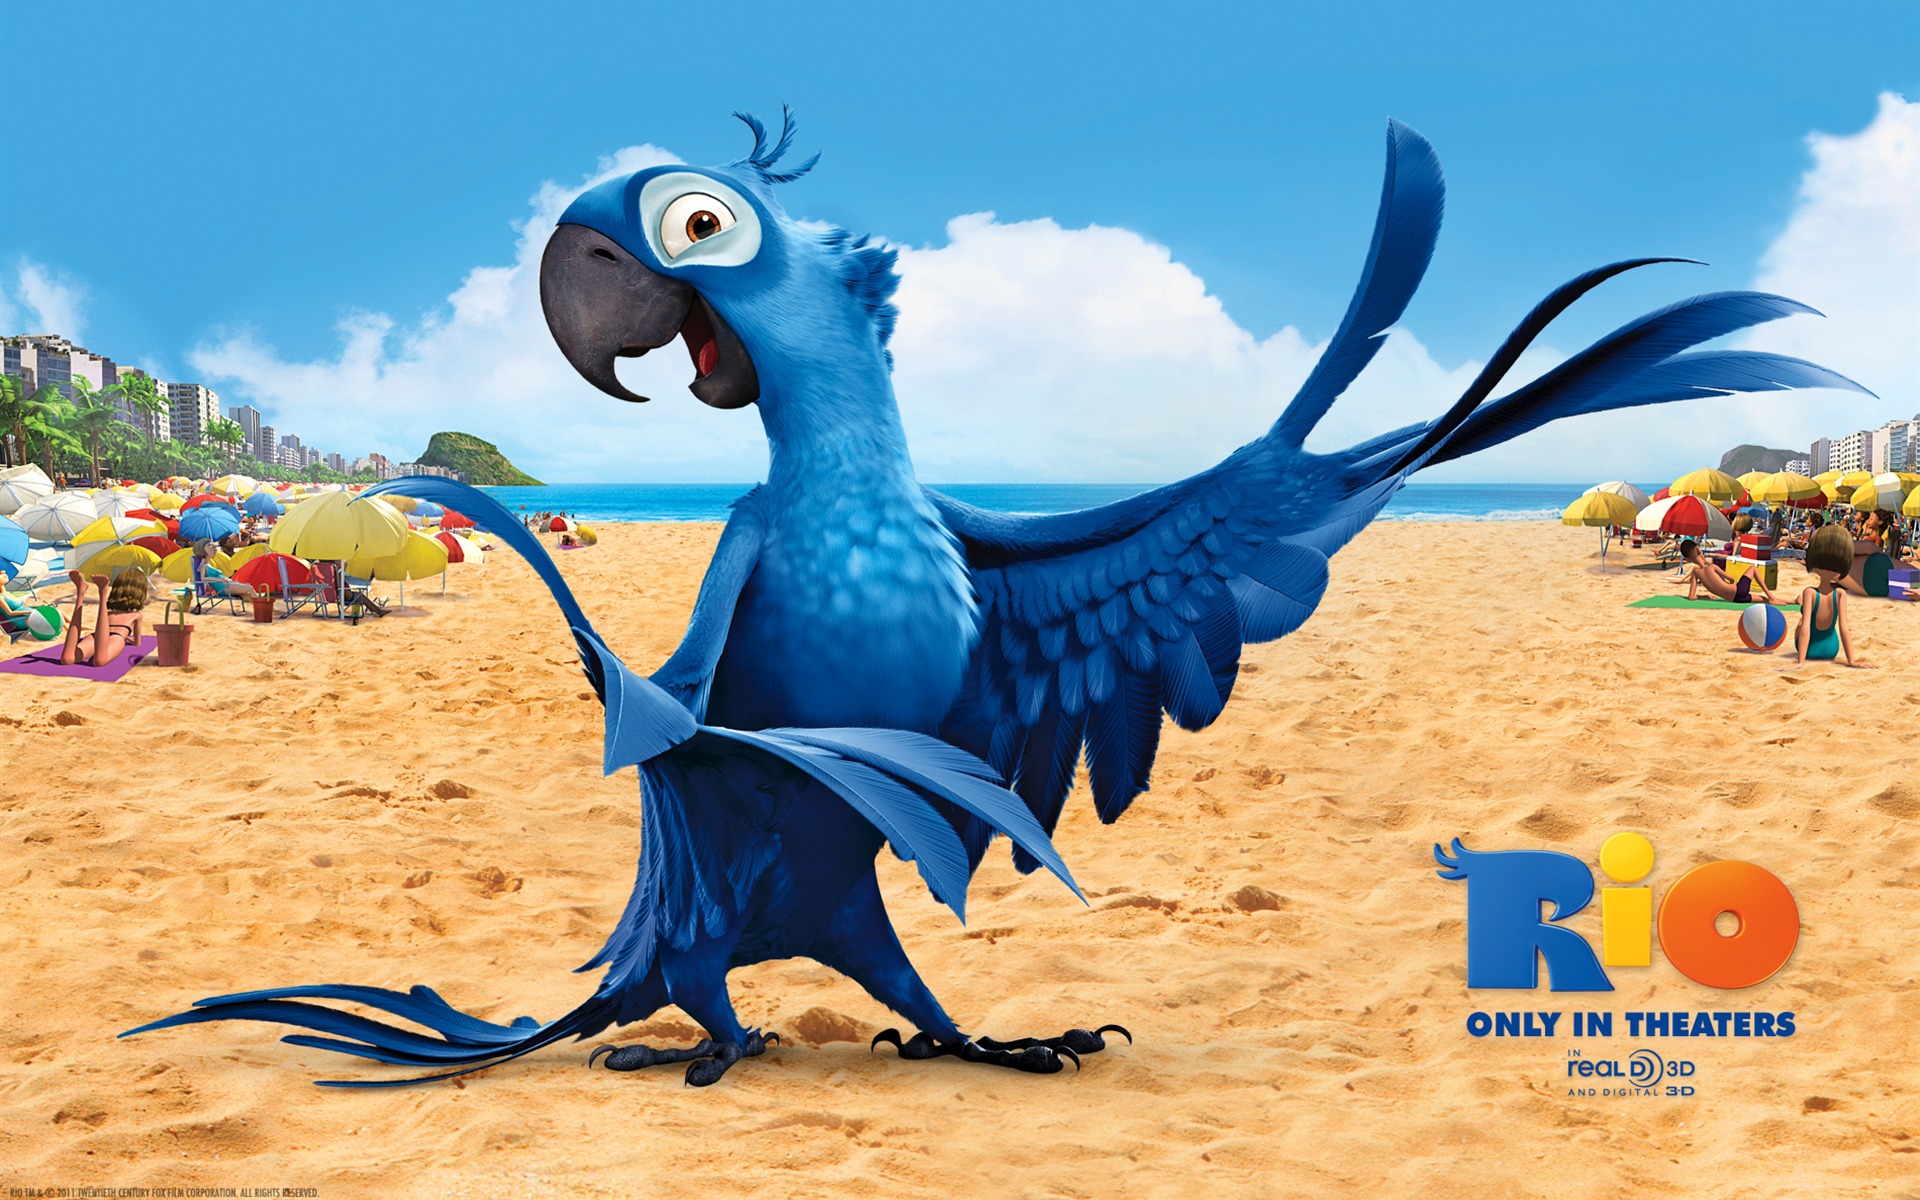 Rio 2011 wallpapers #2 - 1920x1200